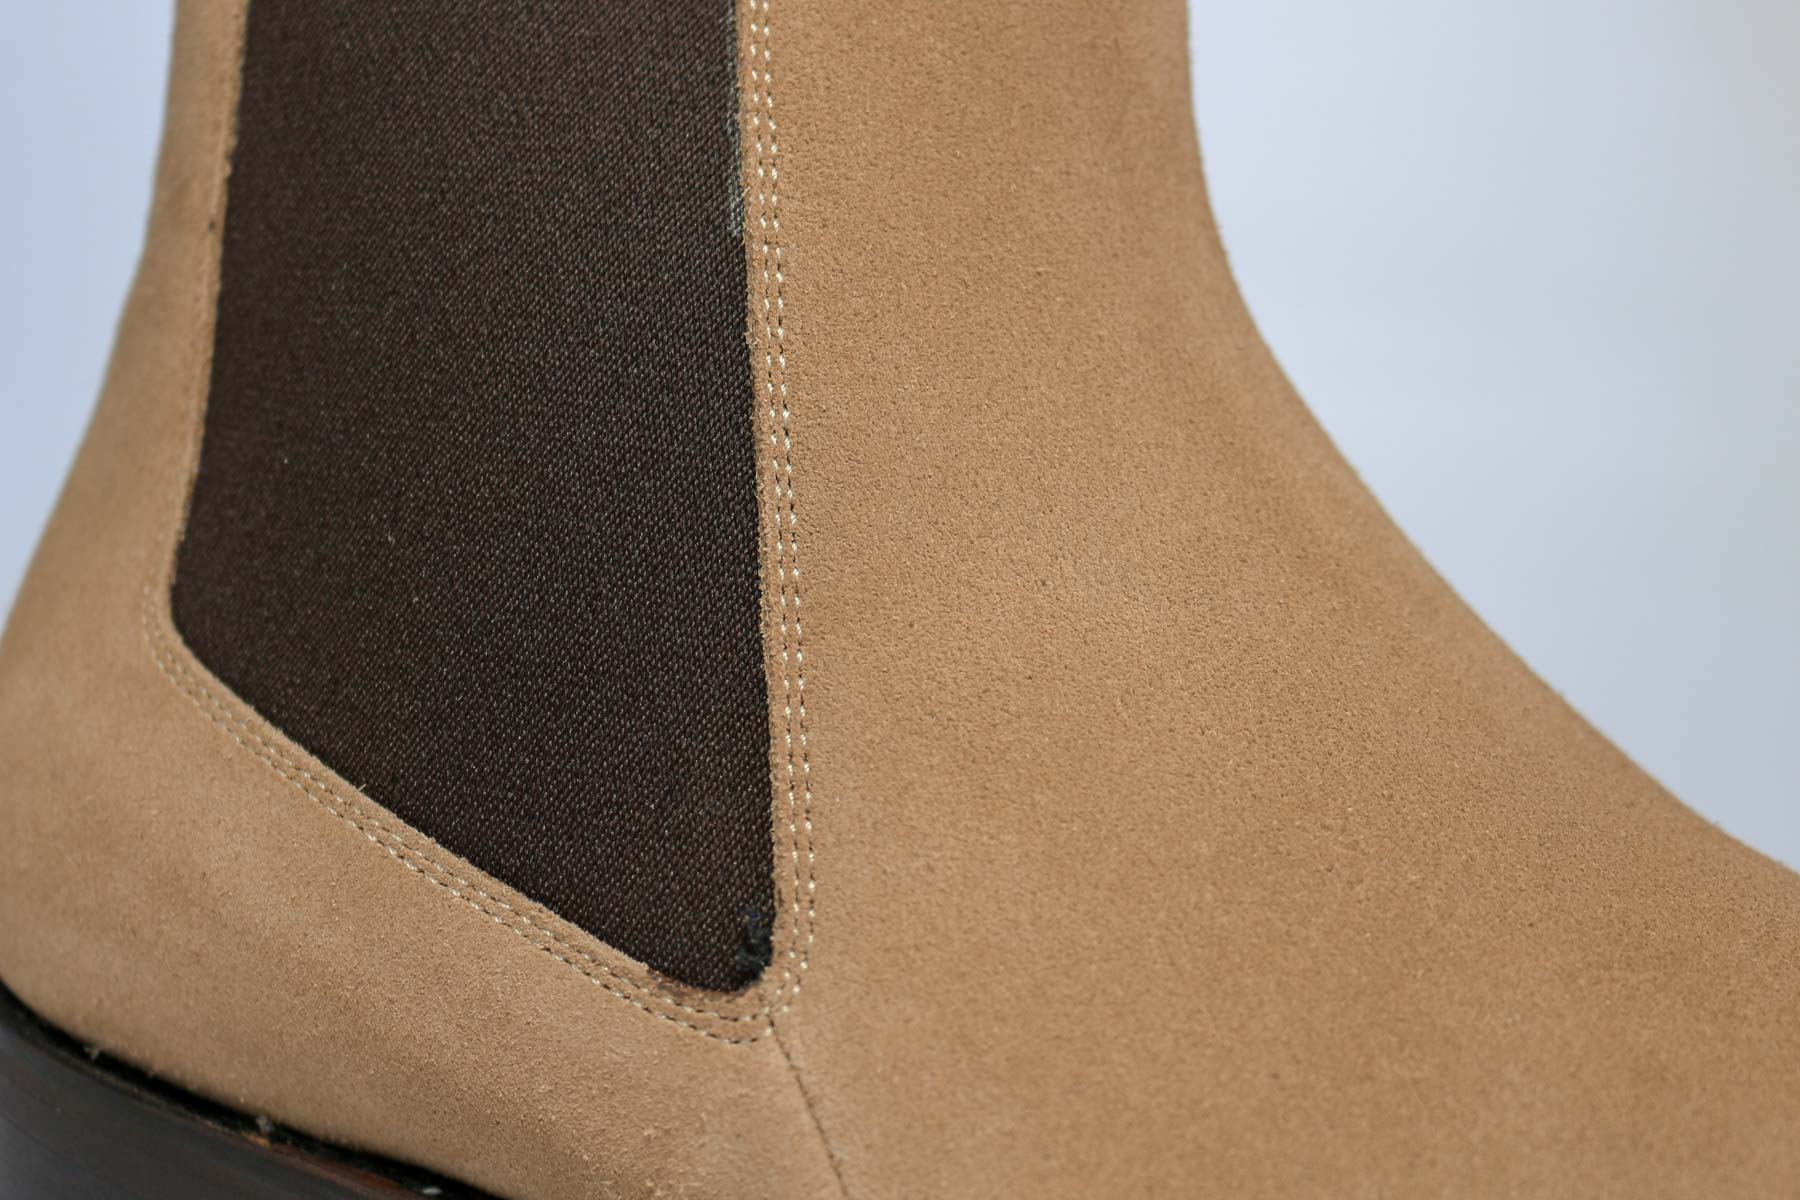 Suede Boots by The Noble Shoe stiching